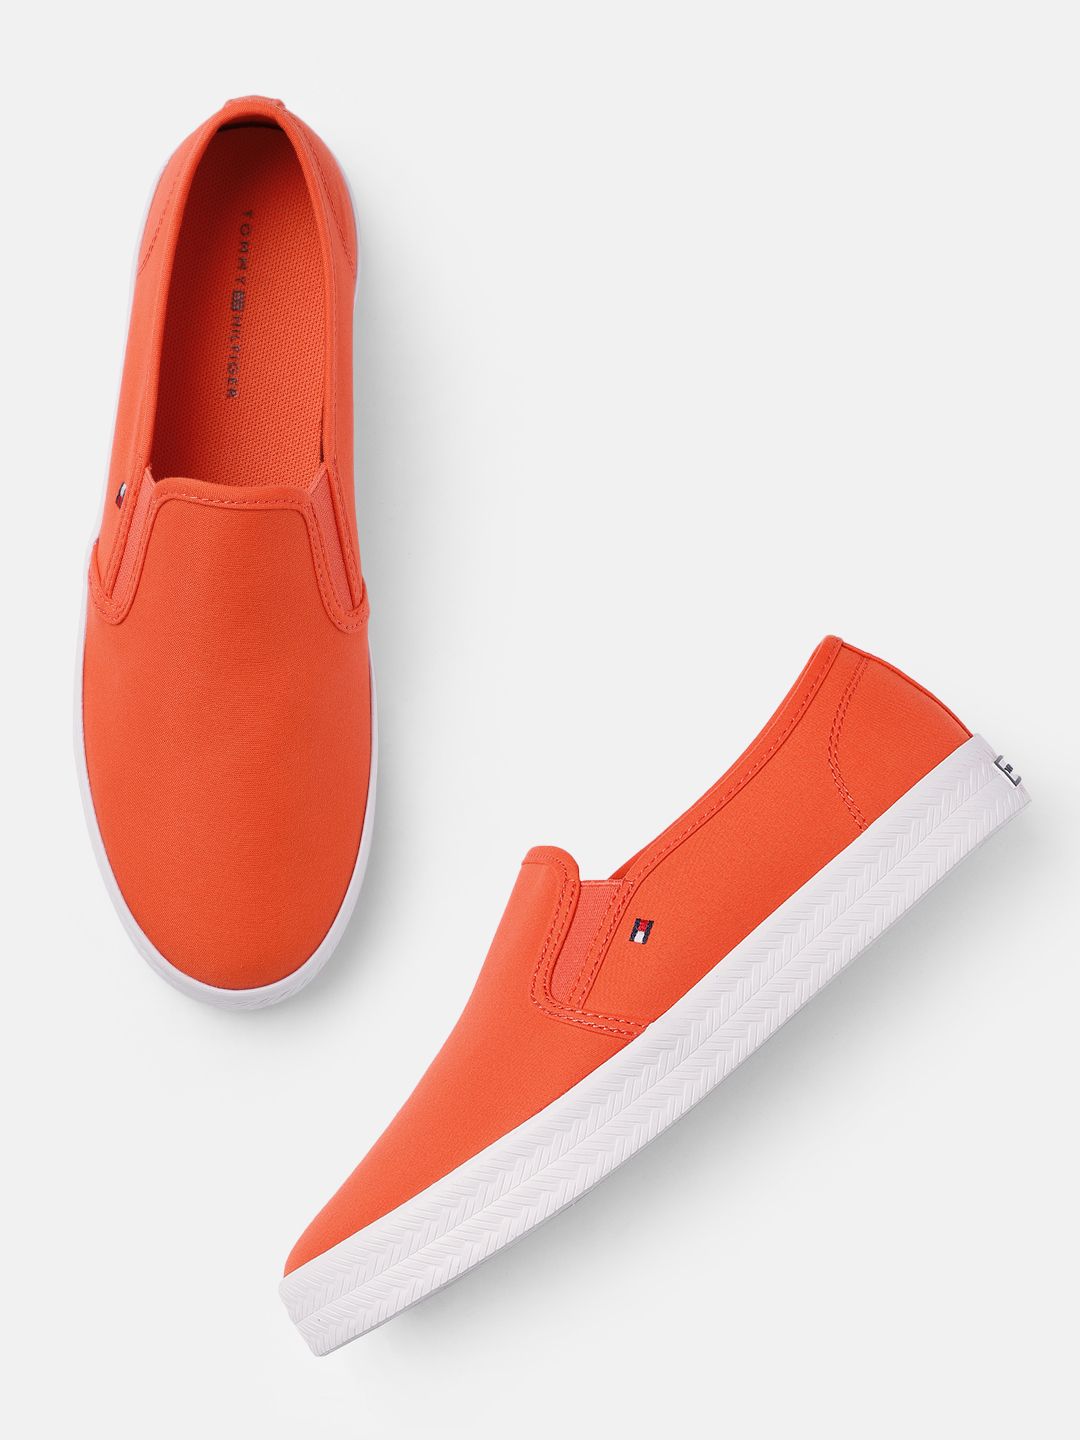 Tommy Hilfiger Women Coral Slip-On Sneakers Price in India